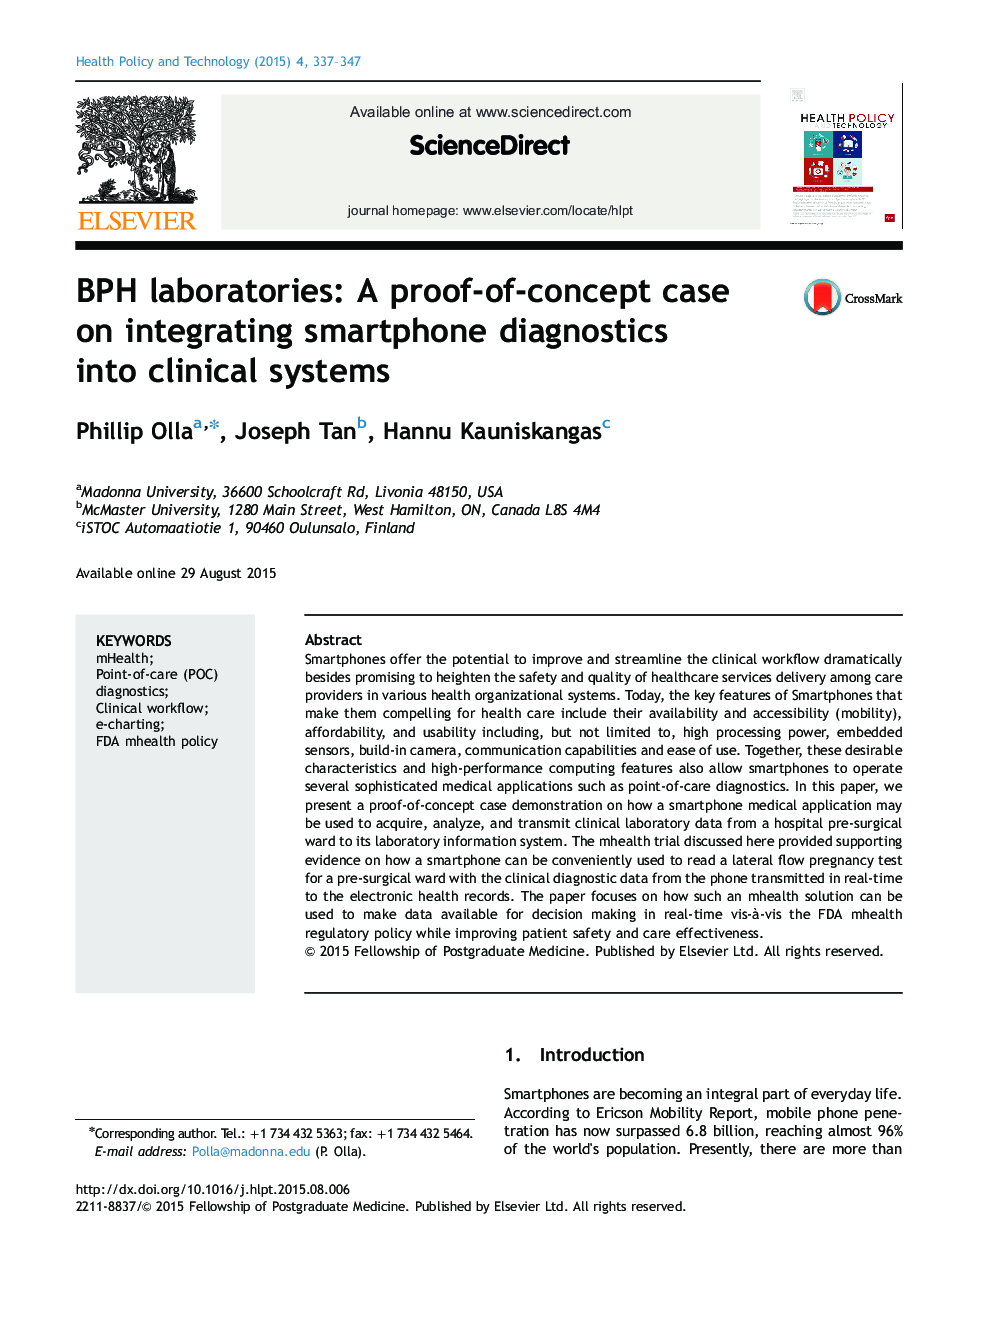 BPH laboratories: A proof-of-concept case on integrating smartphone diagnostics into clinical systems